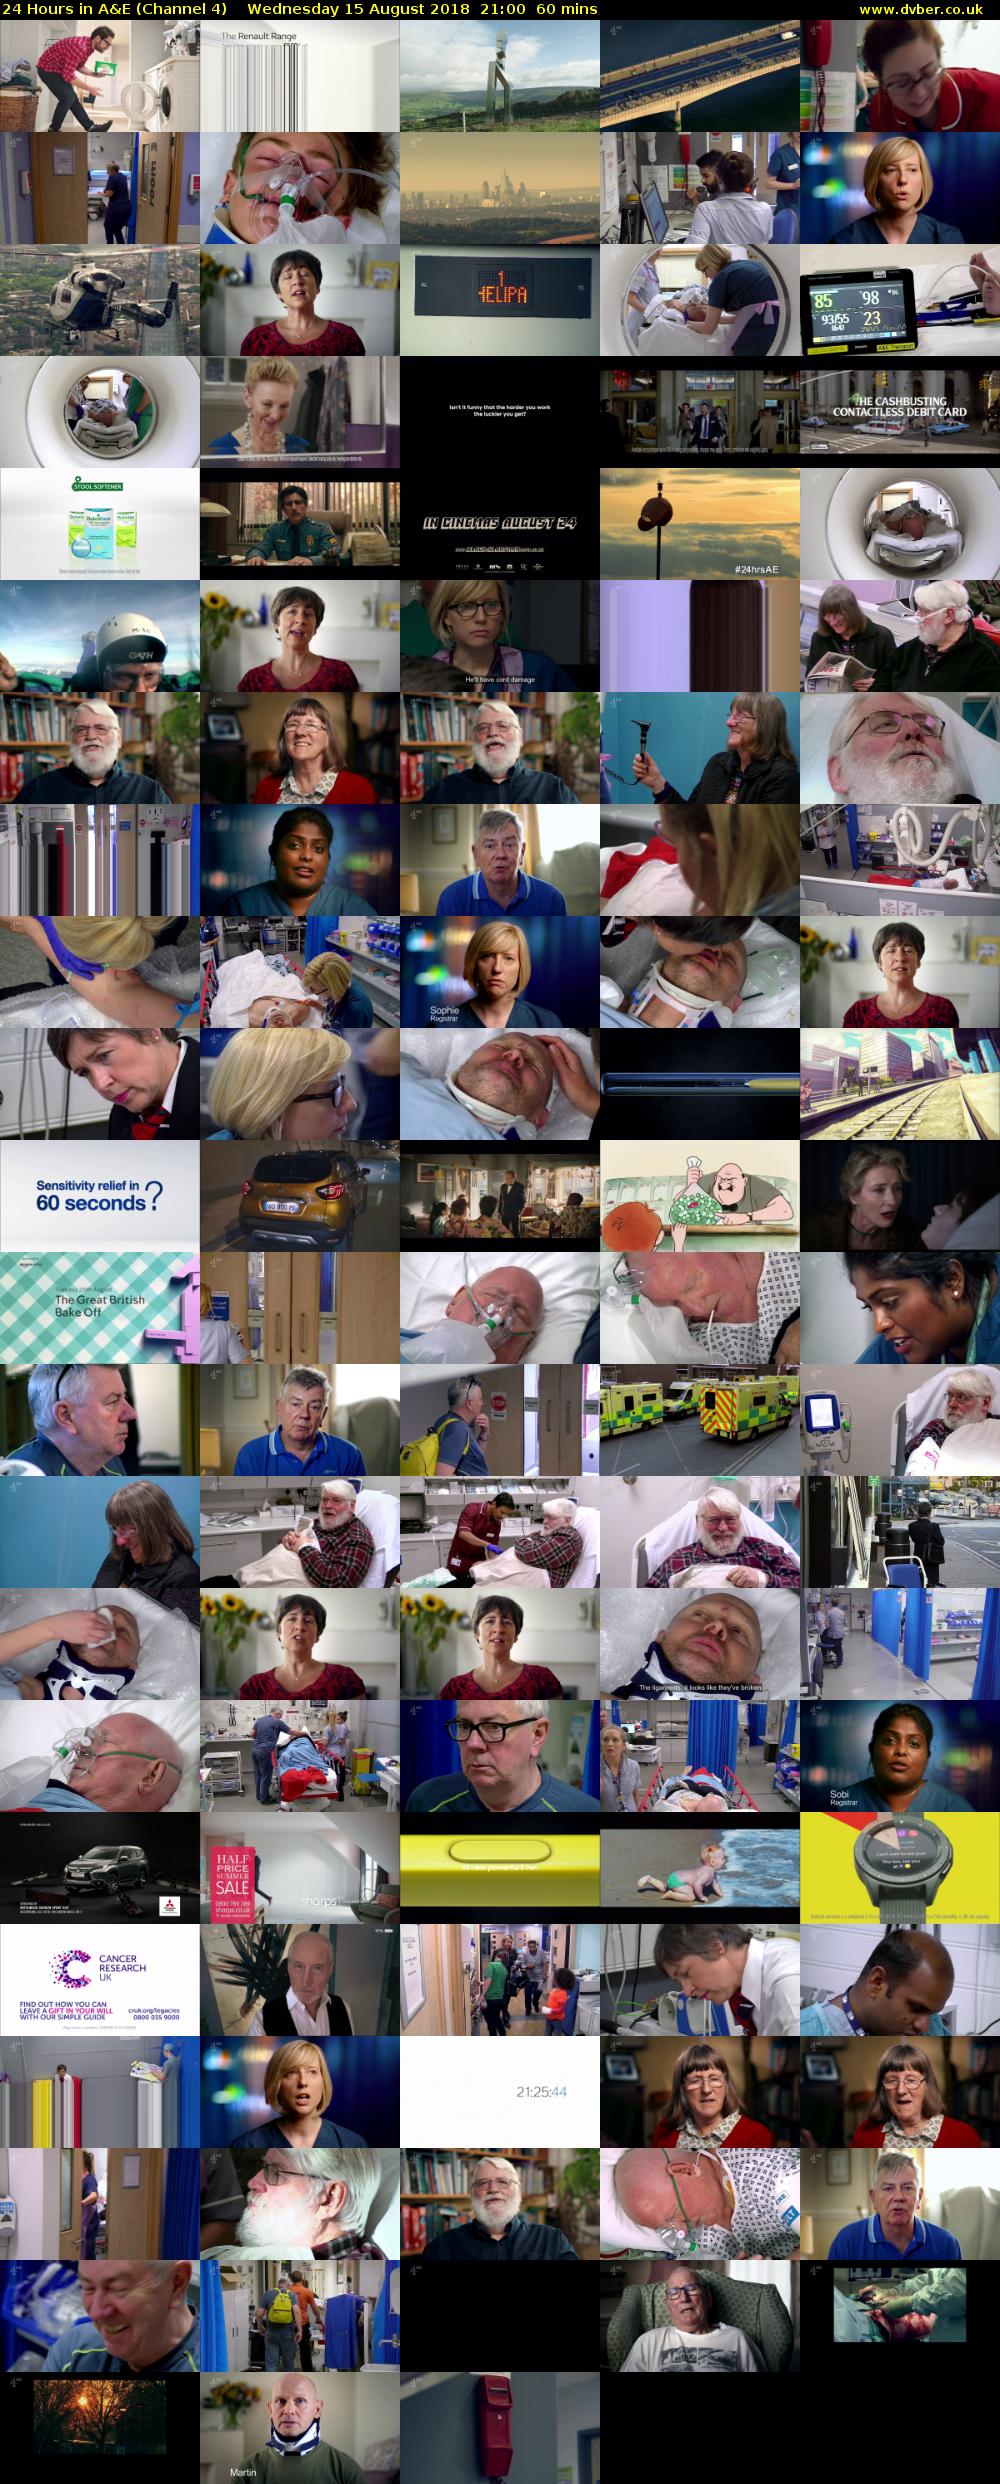 24 Hours in A&E (Channel 4) Wednesday 15 August 2018 21:00 - 22:00